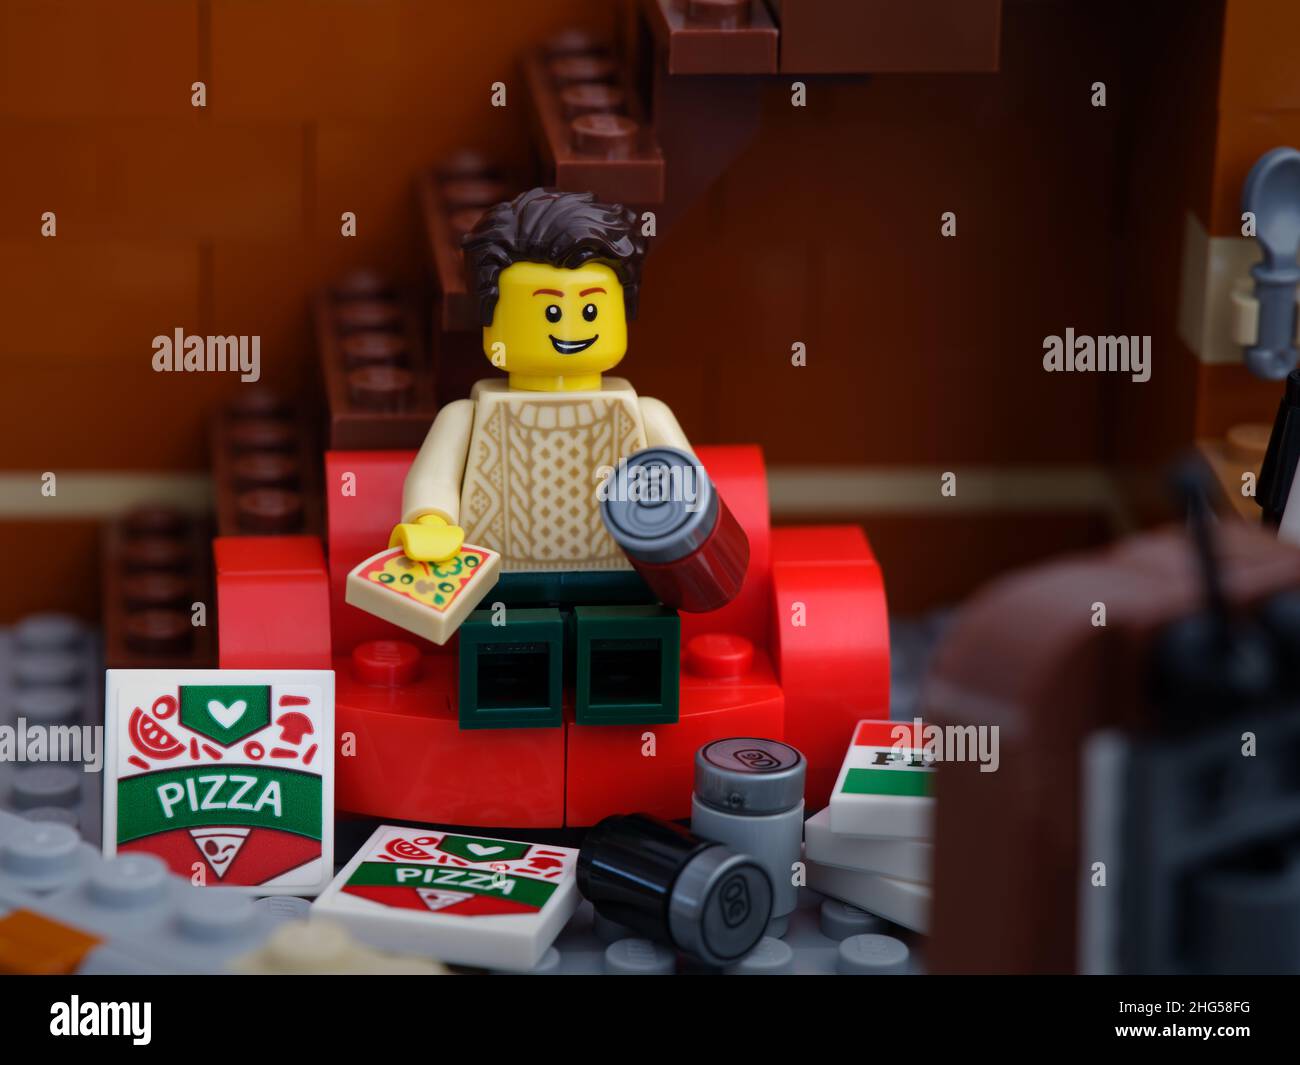 Tambov, Russian Federation January 03, A Lego man sitting on red couch eating a pizza and watching television with pizza boxes and soda cans Stock Photo - Alamy